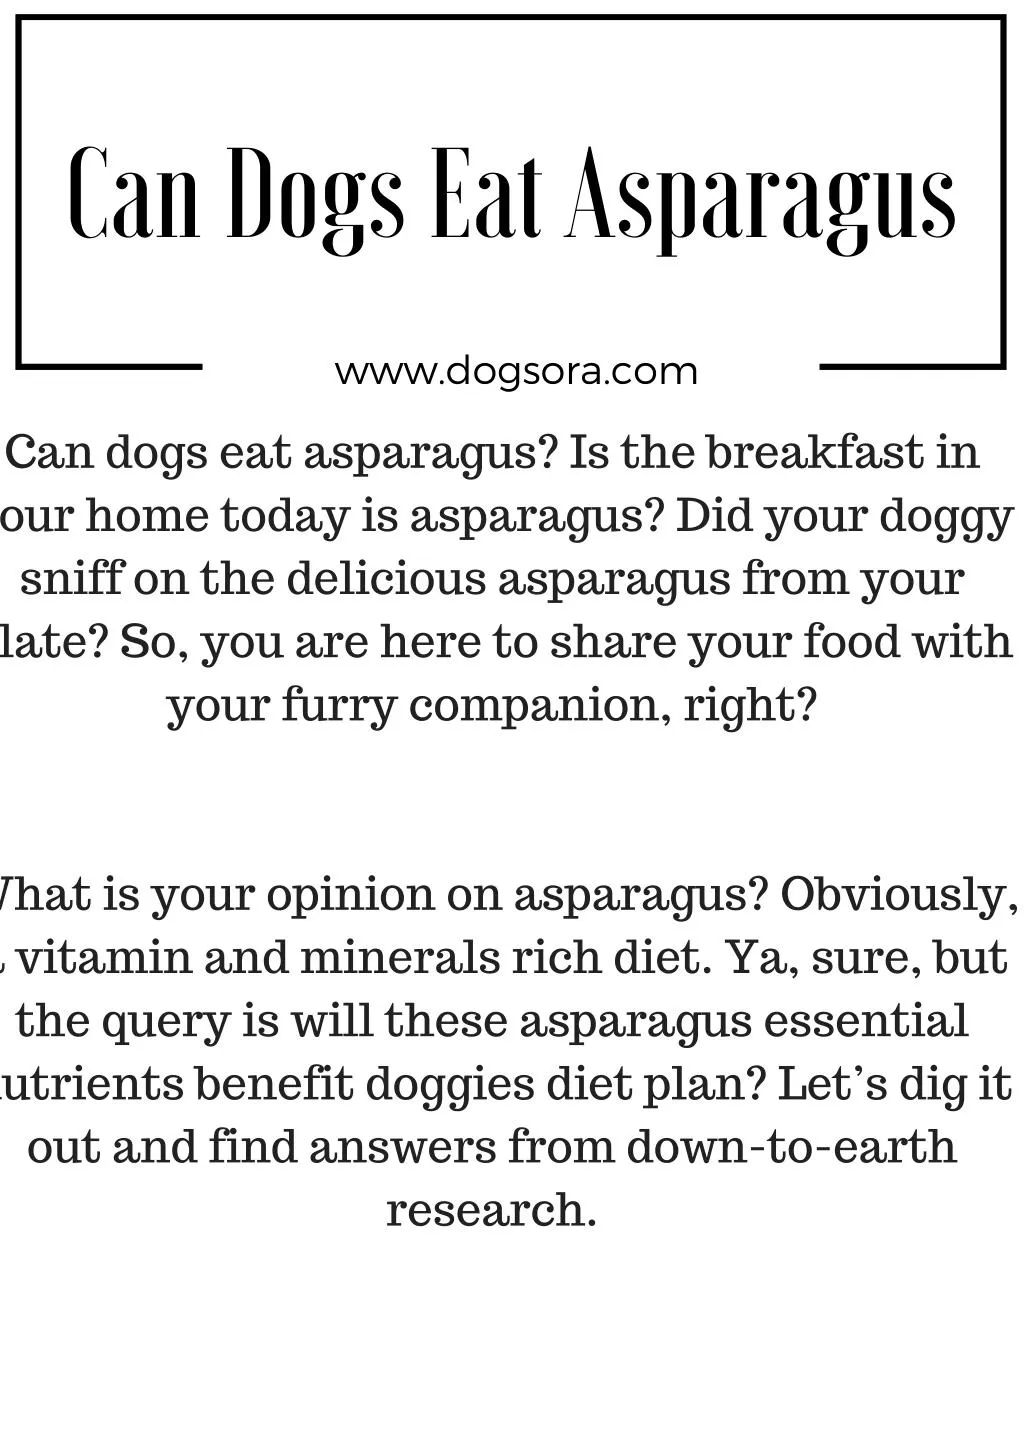 can dogs ea t asparagus